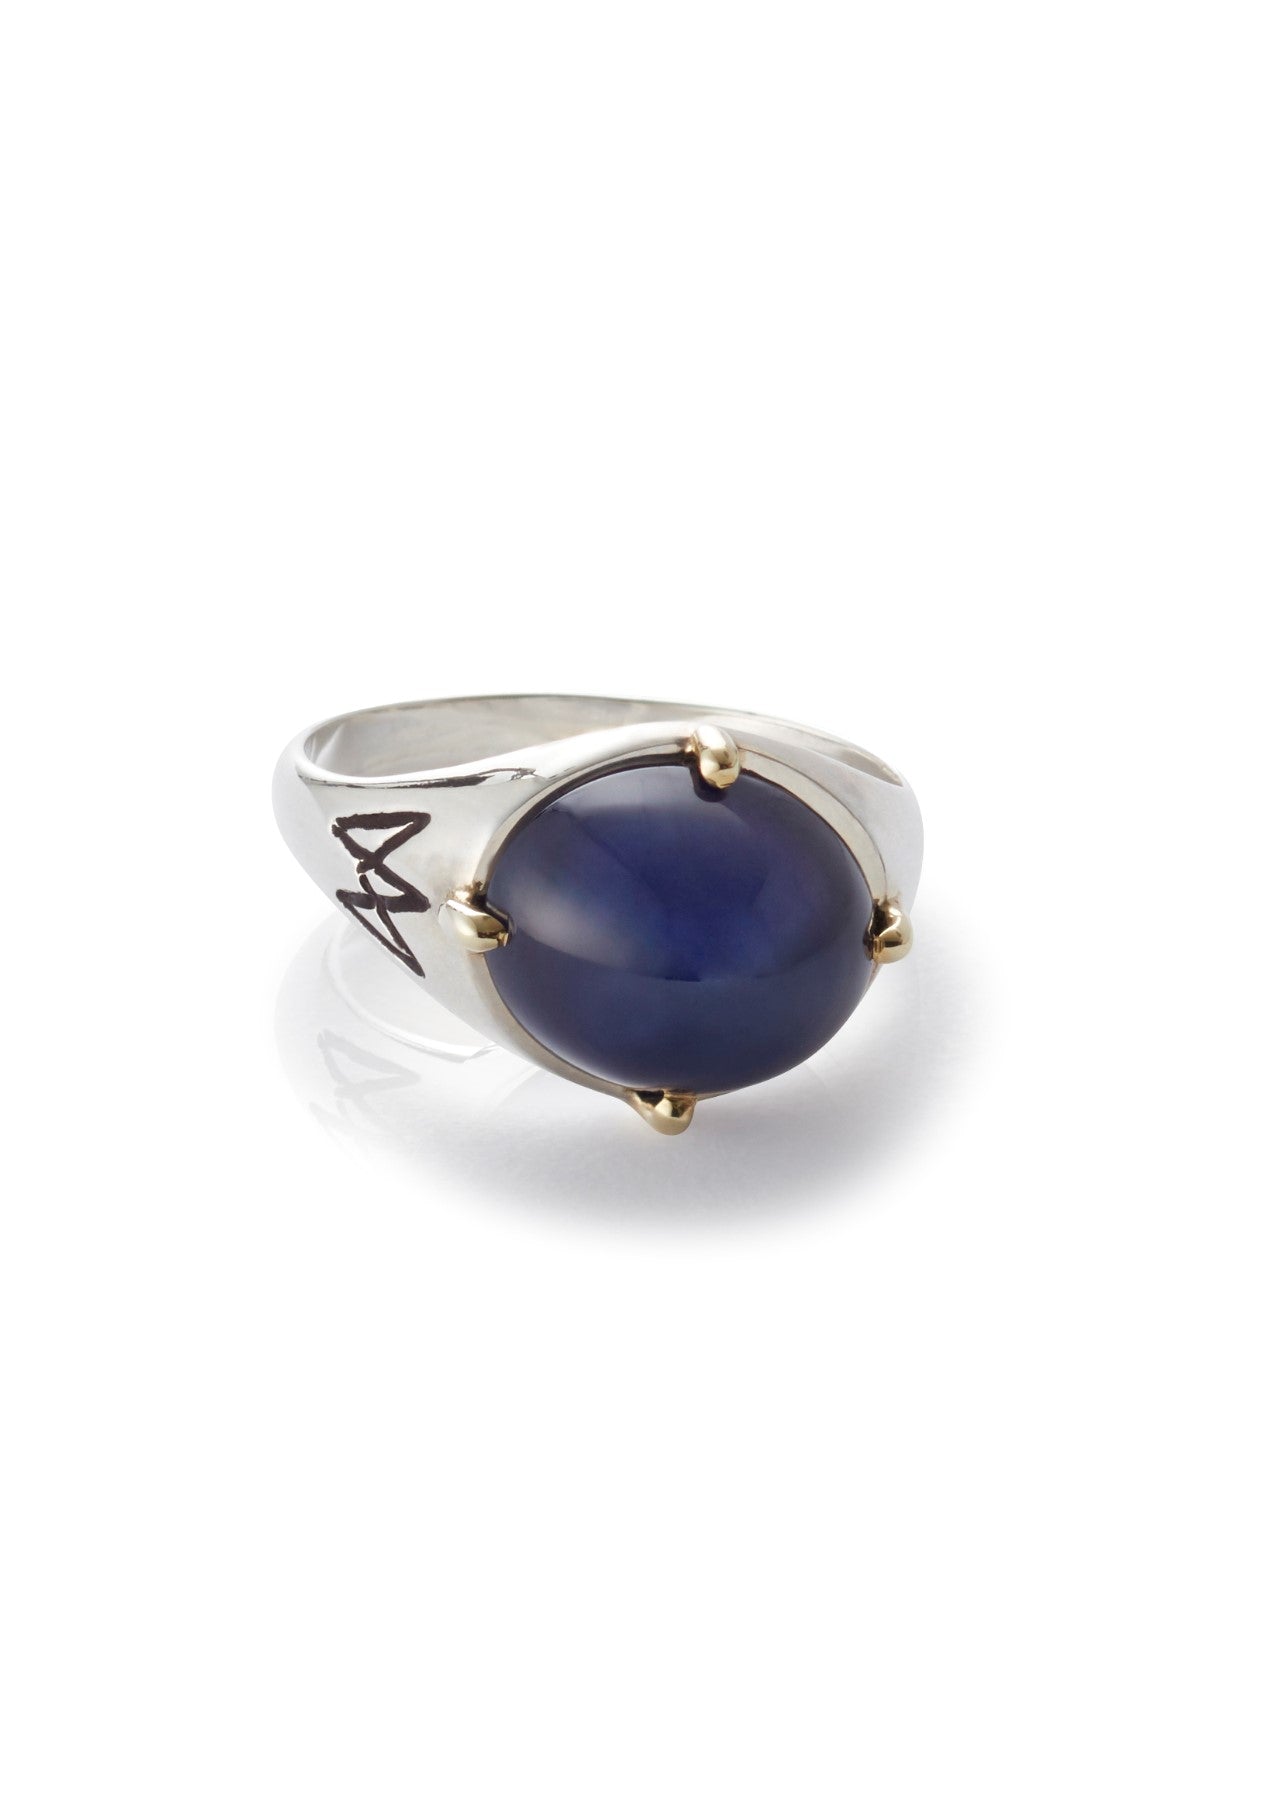 Unisex ring with gold claws and star sapphire